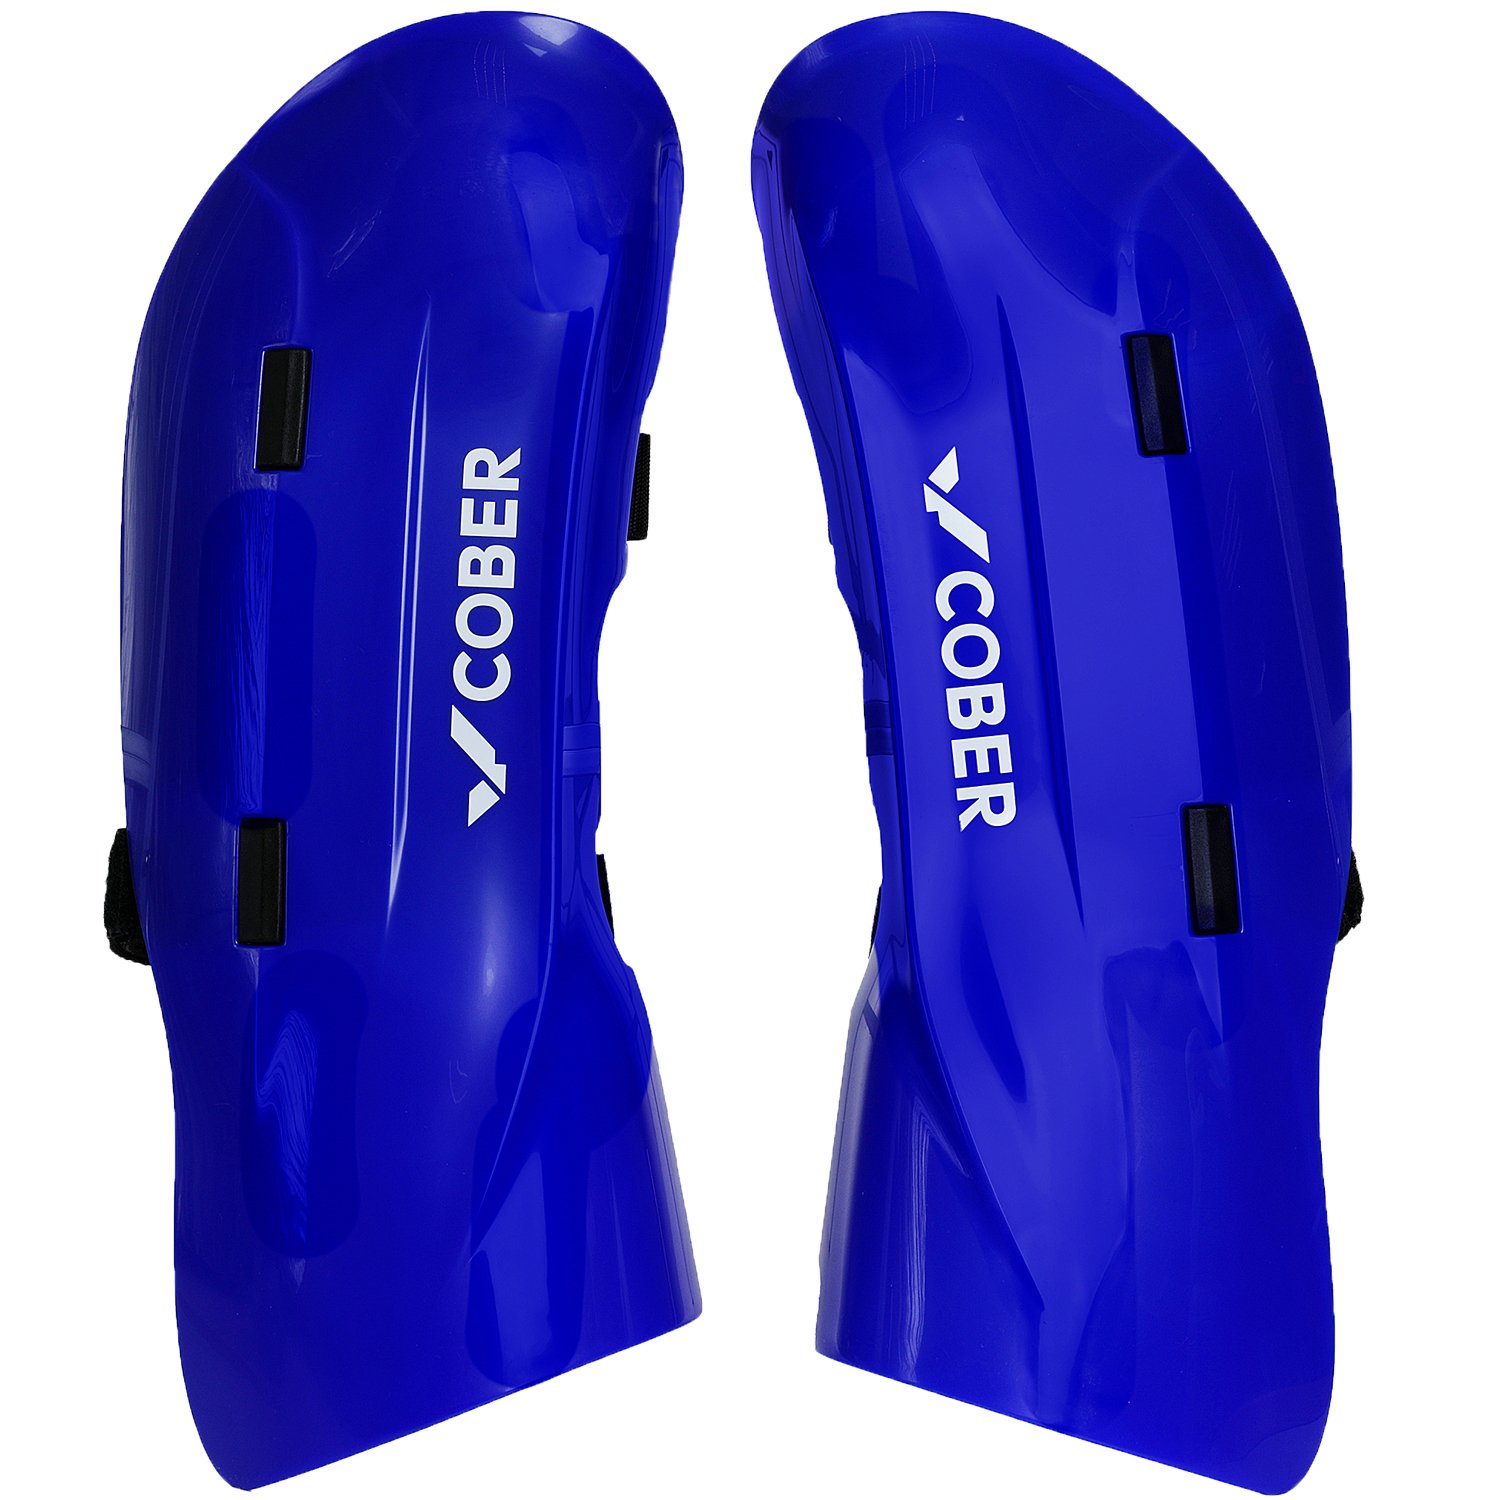 Защита голени COBER 2021-22 Shin Guards Adult, 41 cm, взрослый, 9909 1 pair thickening inner lining football guards leg protector soft without strapping soccer shin pads breathable reusable